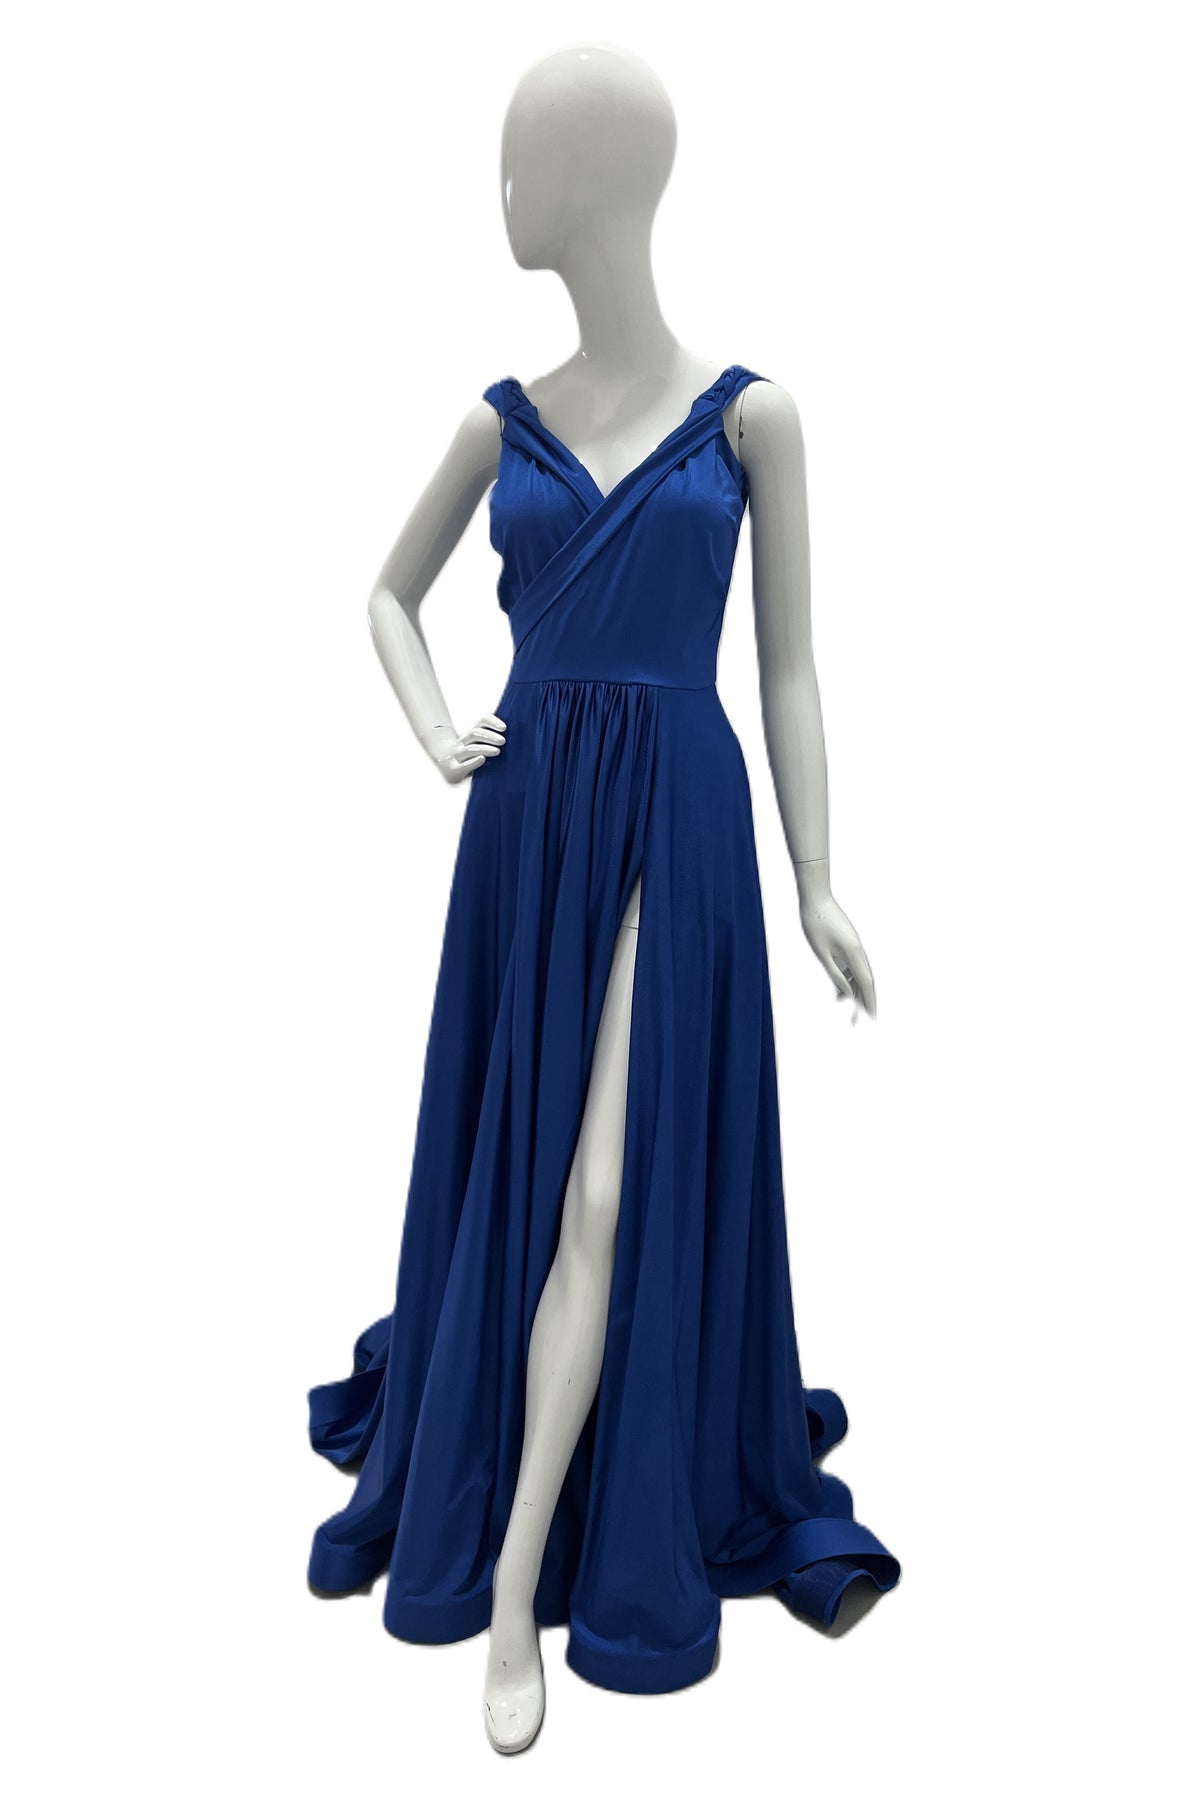 Jessica Angel Straps On The Shoulder A-Line With High Front Slit With Pockets Gown